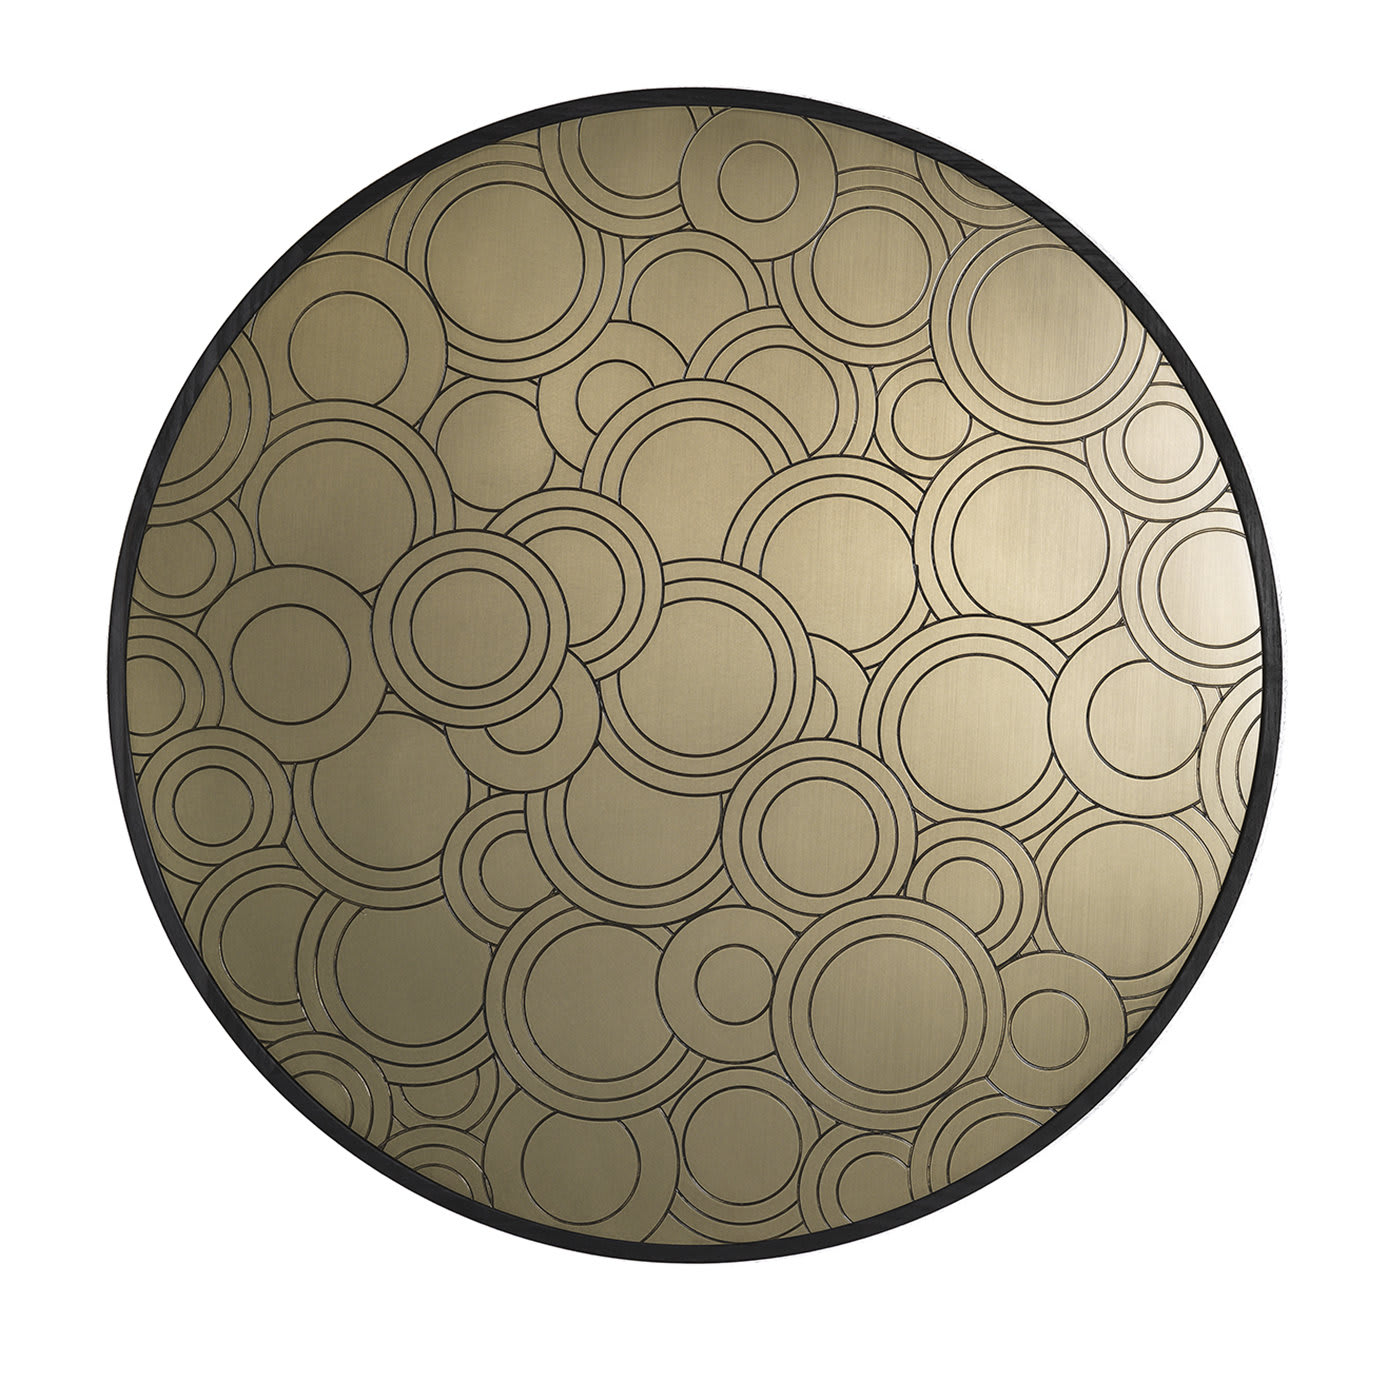 Eclectic Sconce with Circles - Mobilificio RBR Ebanisteria